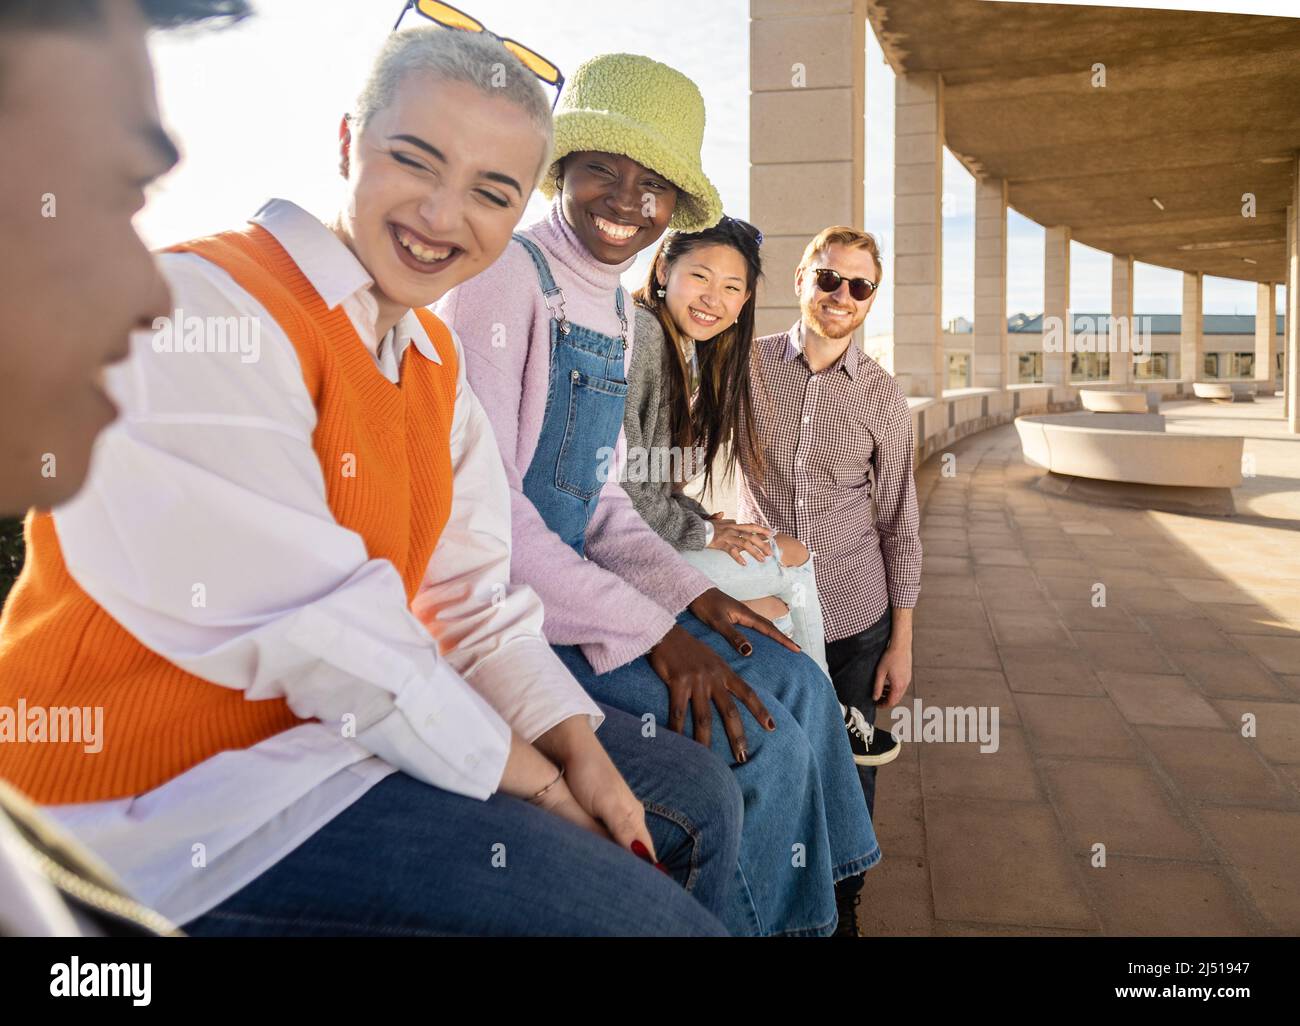 Group of multiracial friends having fun together while hanging out outdoors. Stock Photo